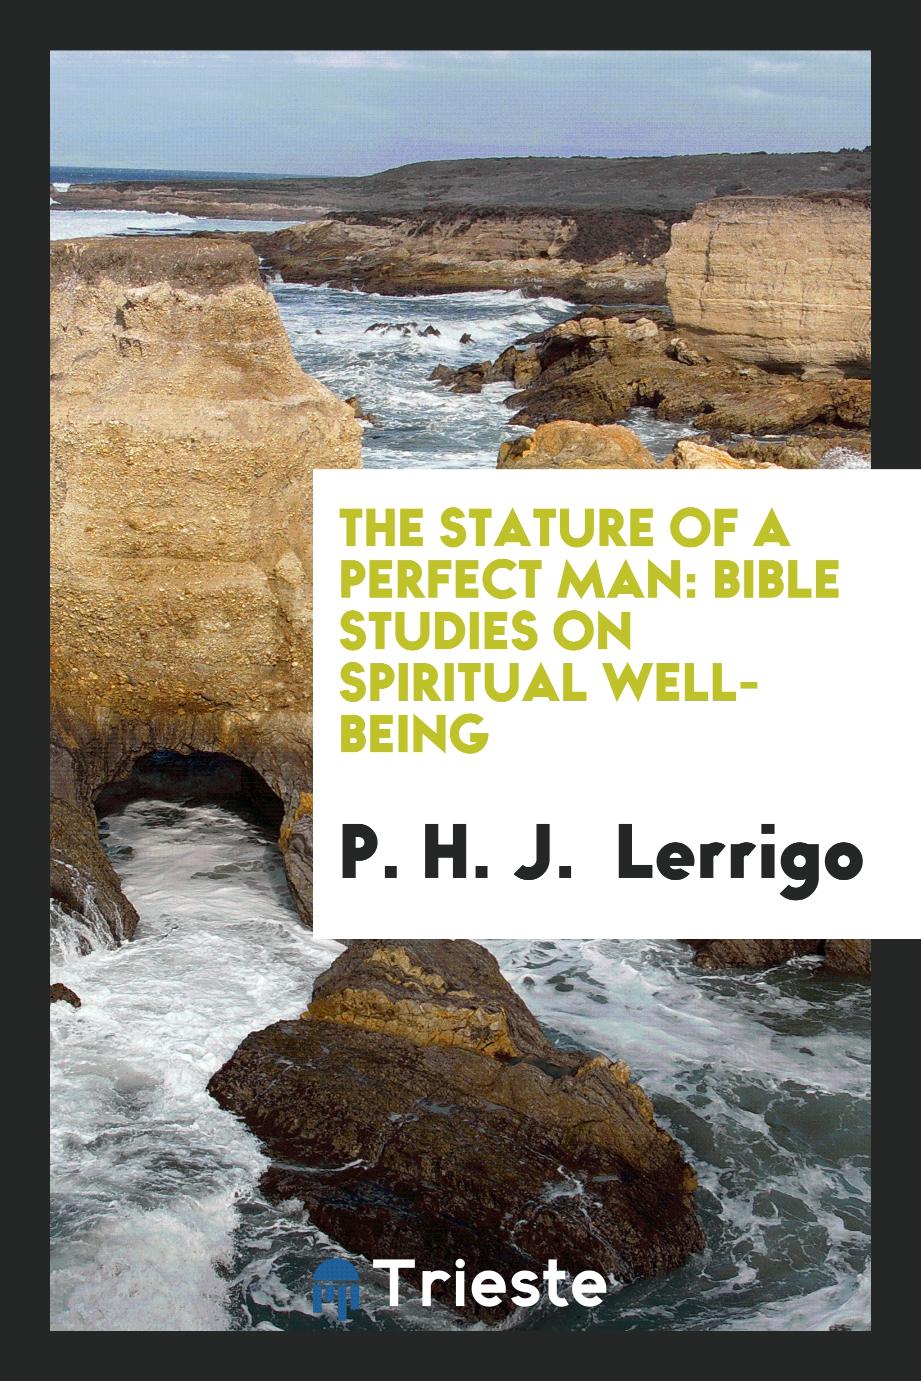 The stature of a perfect man: Bible studies on spiritual well-being